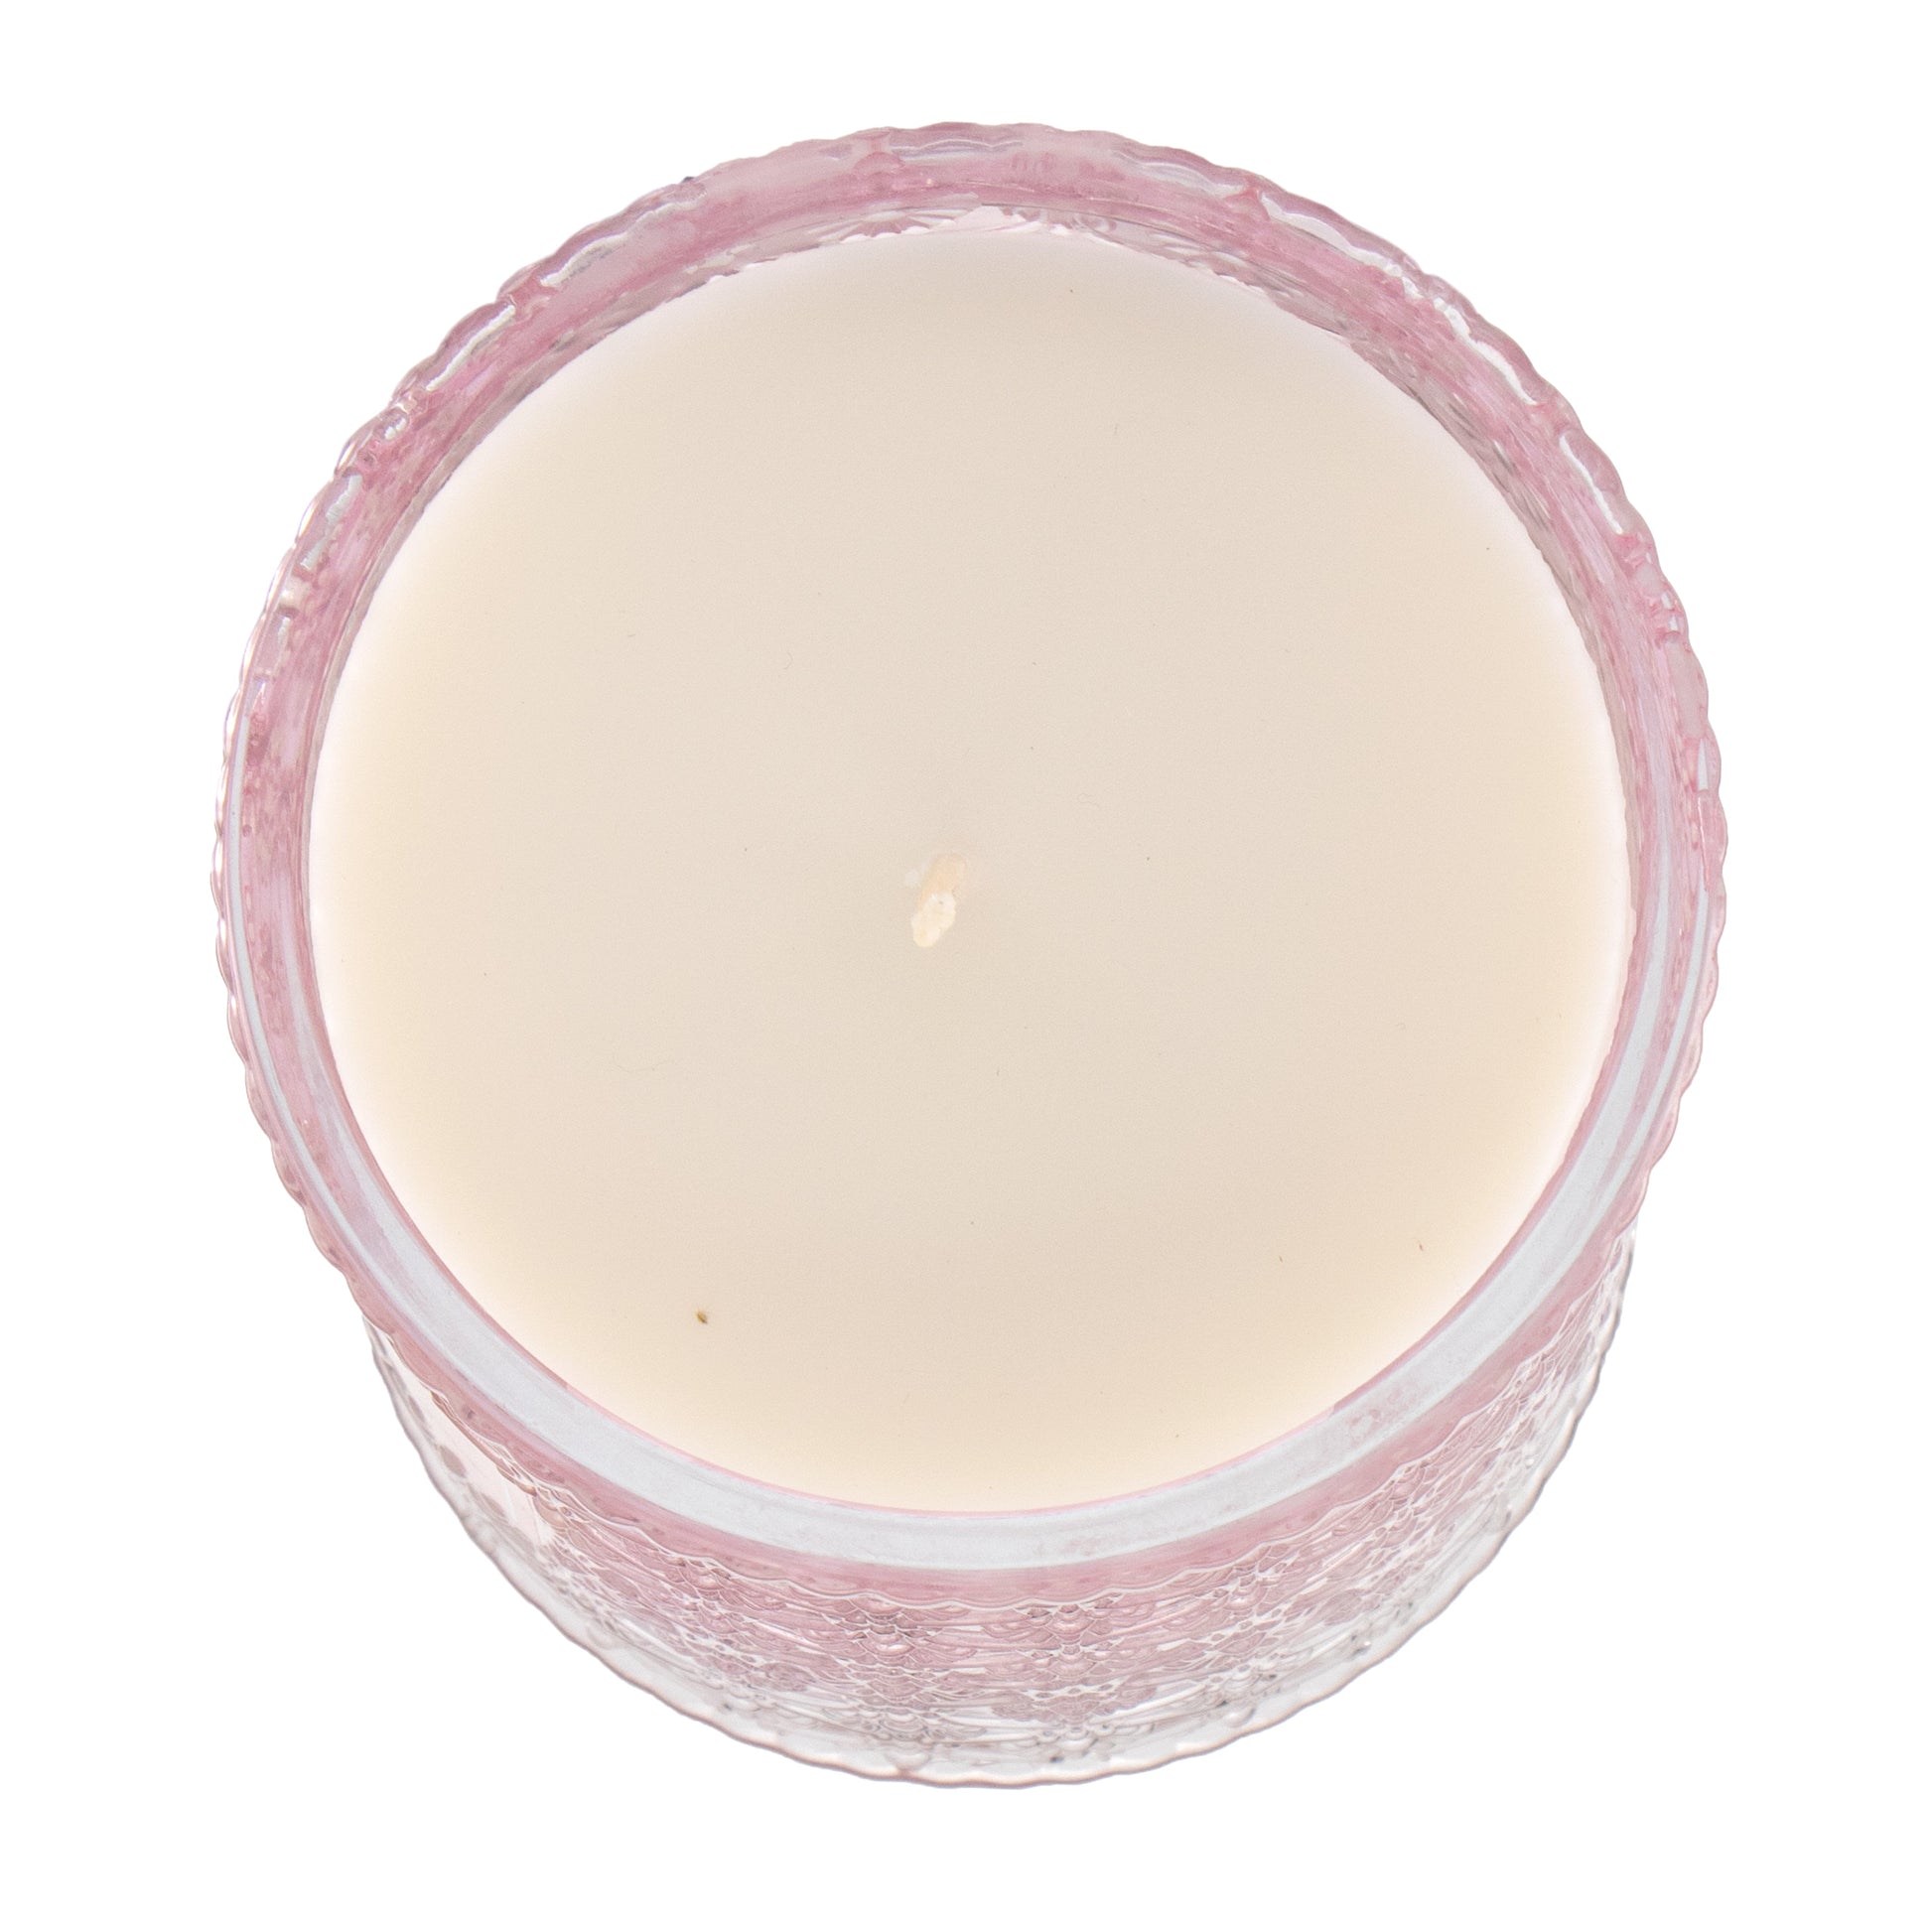 Pier 1 Pink Champagne Luxe 19oz Filled Candle - The Home Resolution